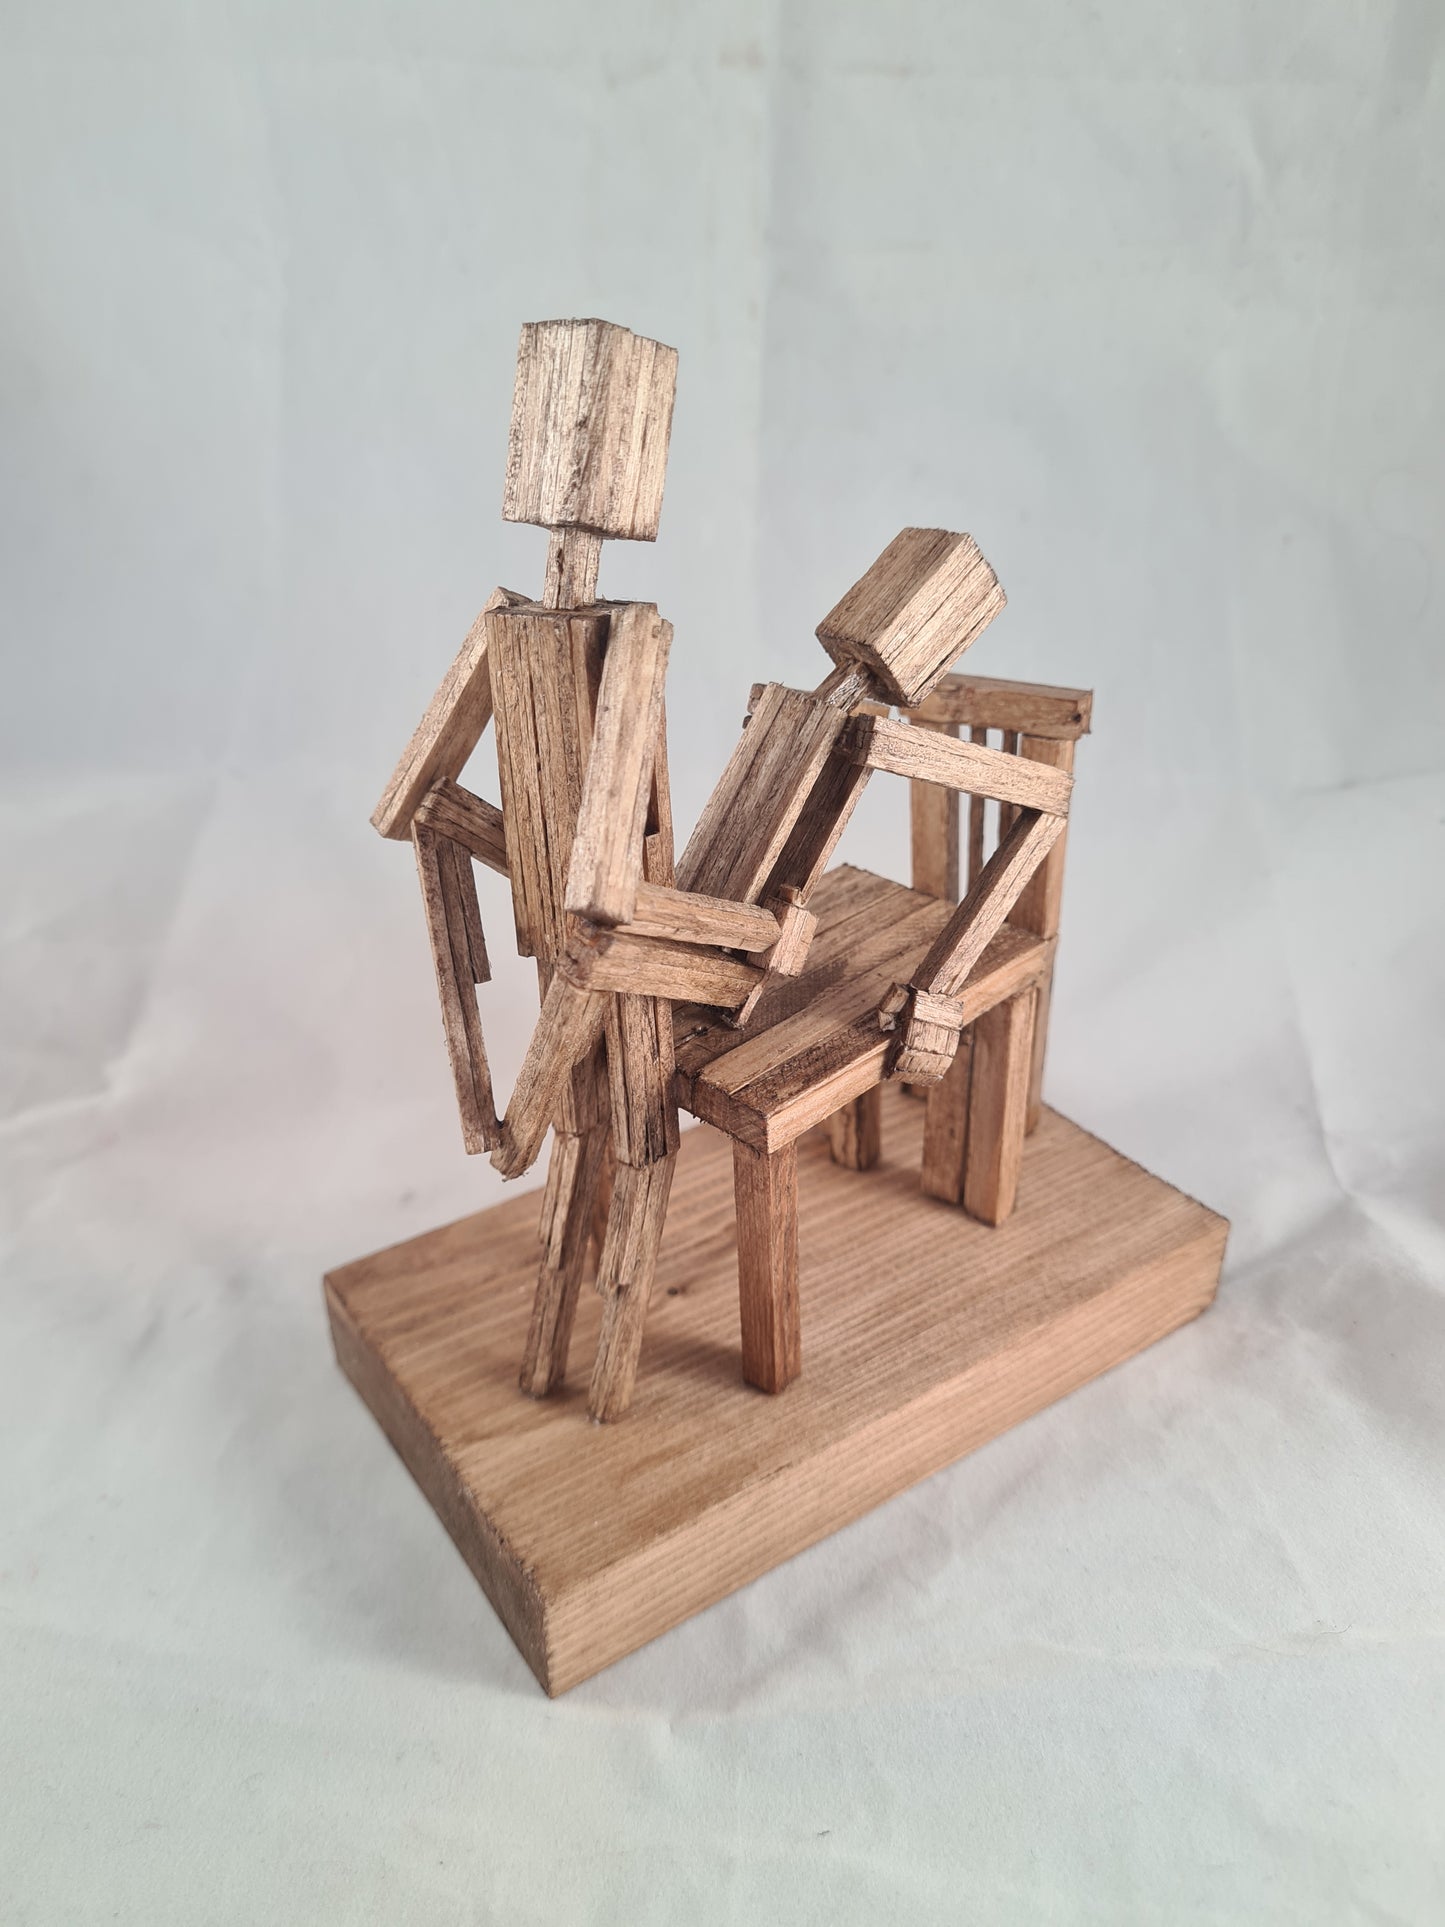 Table Service - Handcrafted Wooden Matchstick Figures - Gifts, Ornaments and Decor By Tiggidy Designs